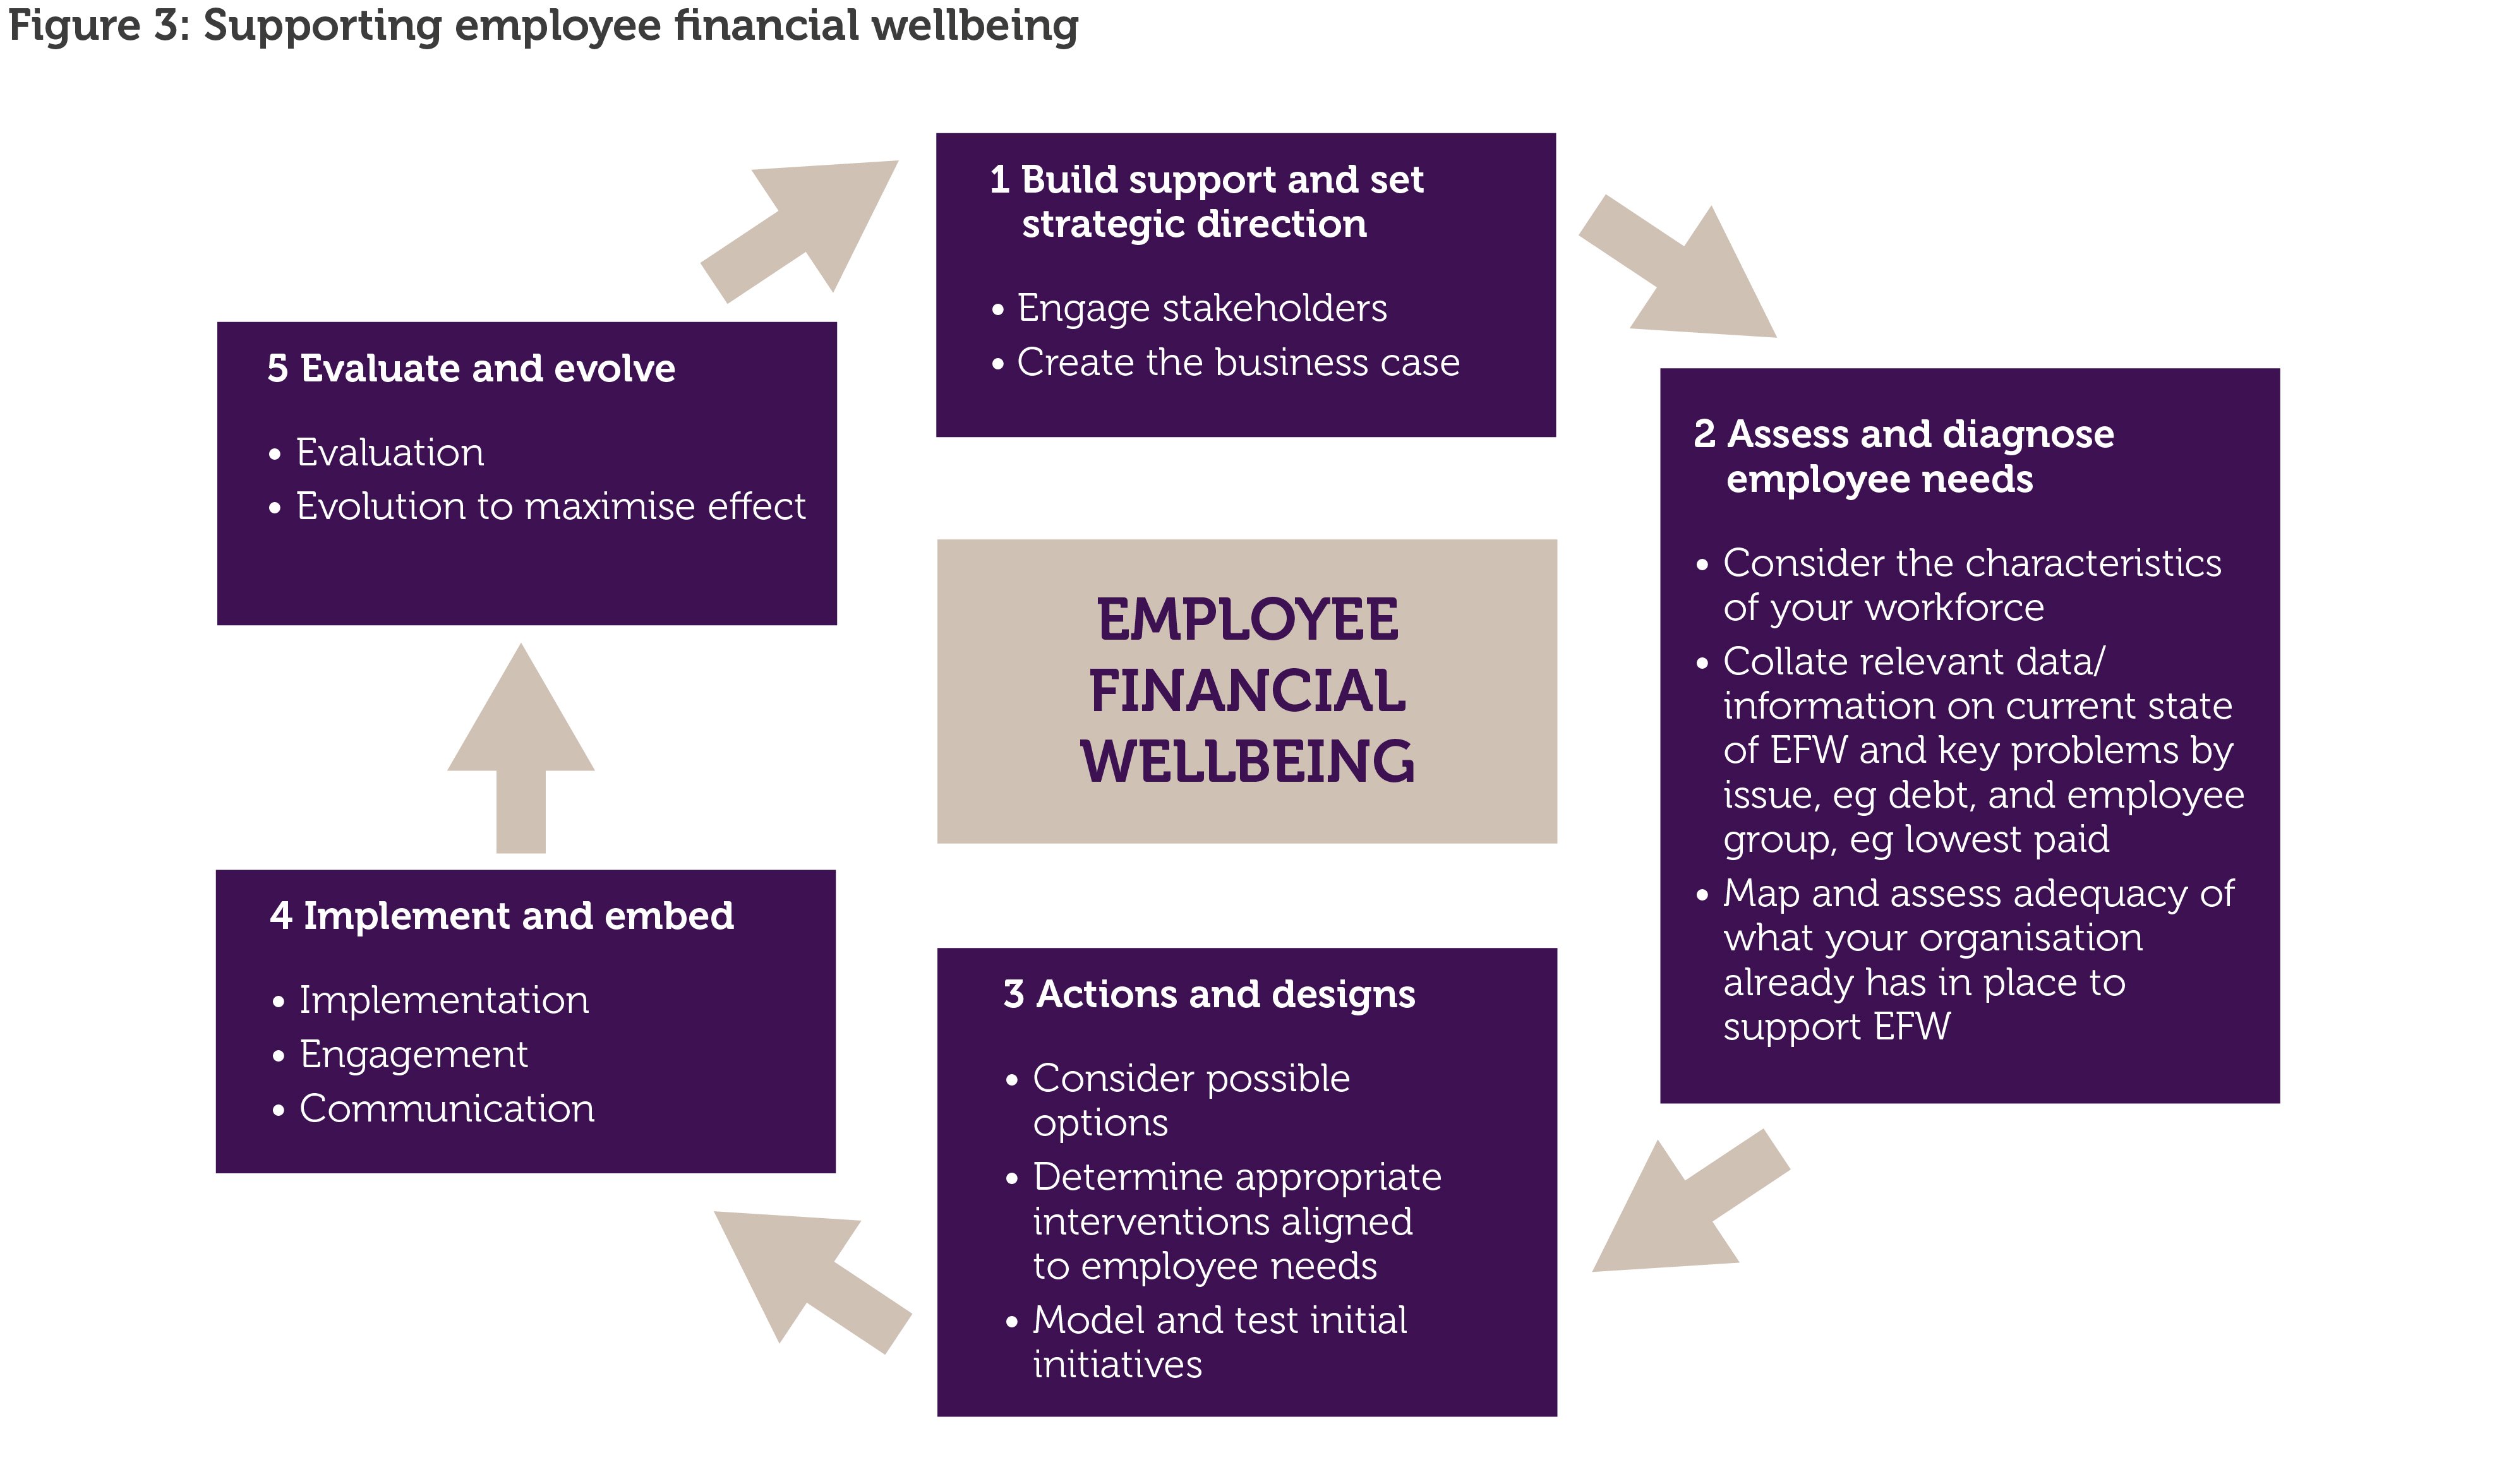 Supporting employee financial wellbeing